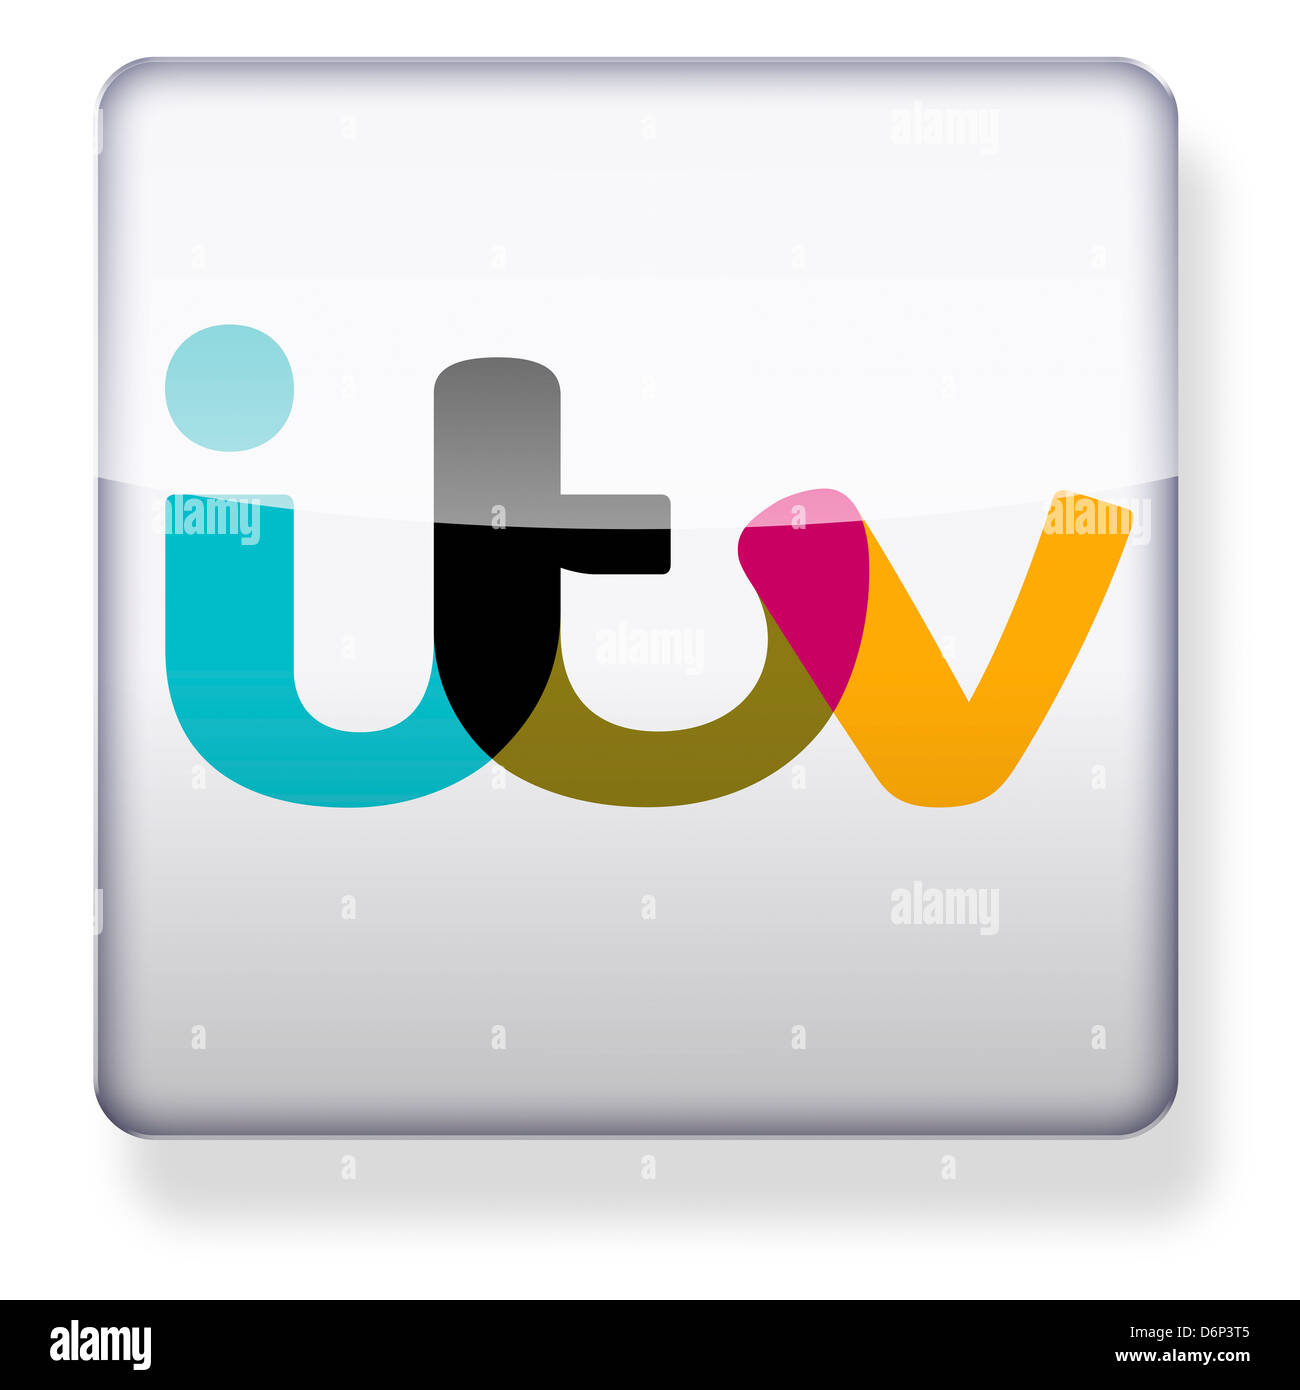 ITV logo as an app icon. Clipping path included. Stock Photo